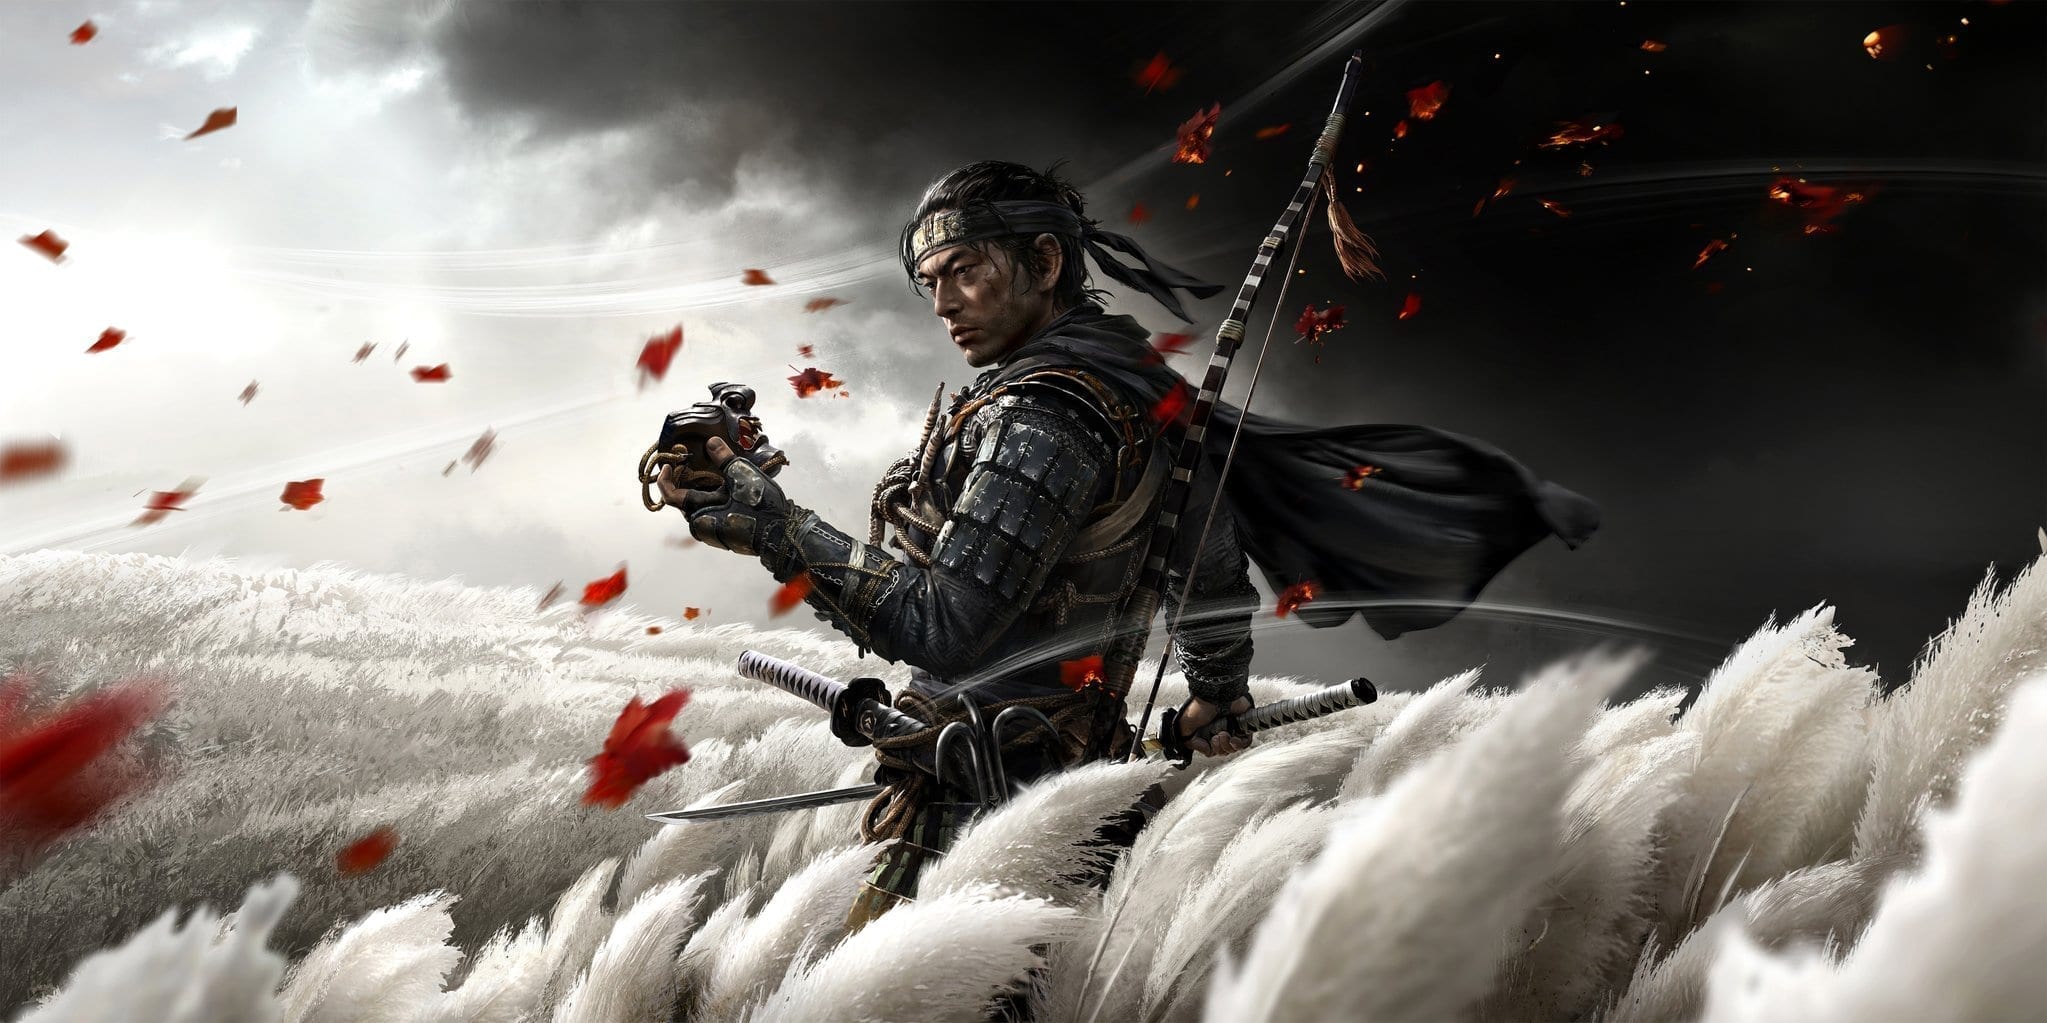 State Of Play To Debut Gameplay of Ghost of Tsushima.